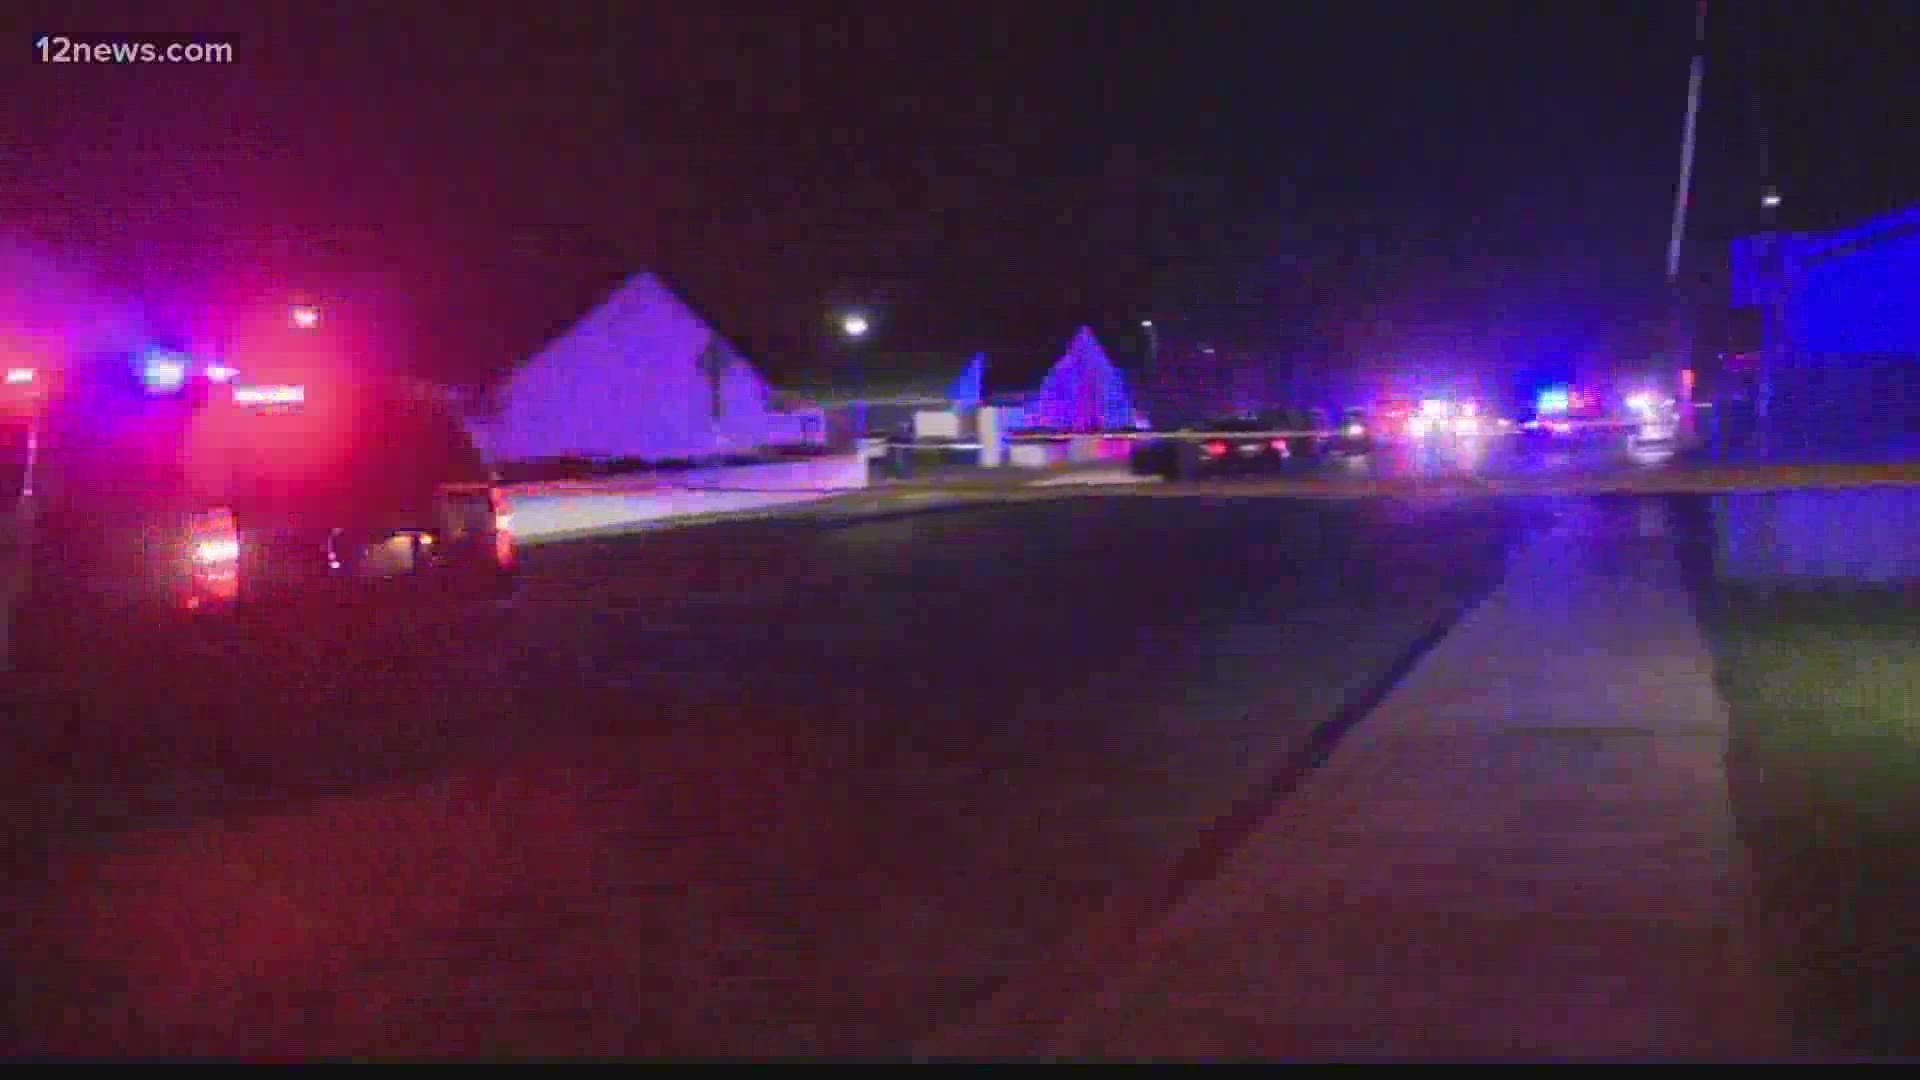 Search for answers is on after police open fire, kill a man after a family dispute in Mesa.